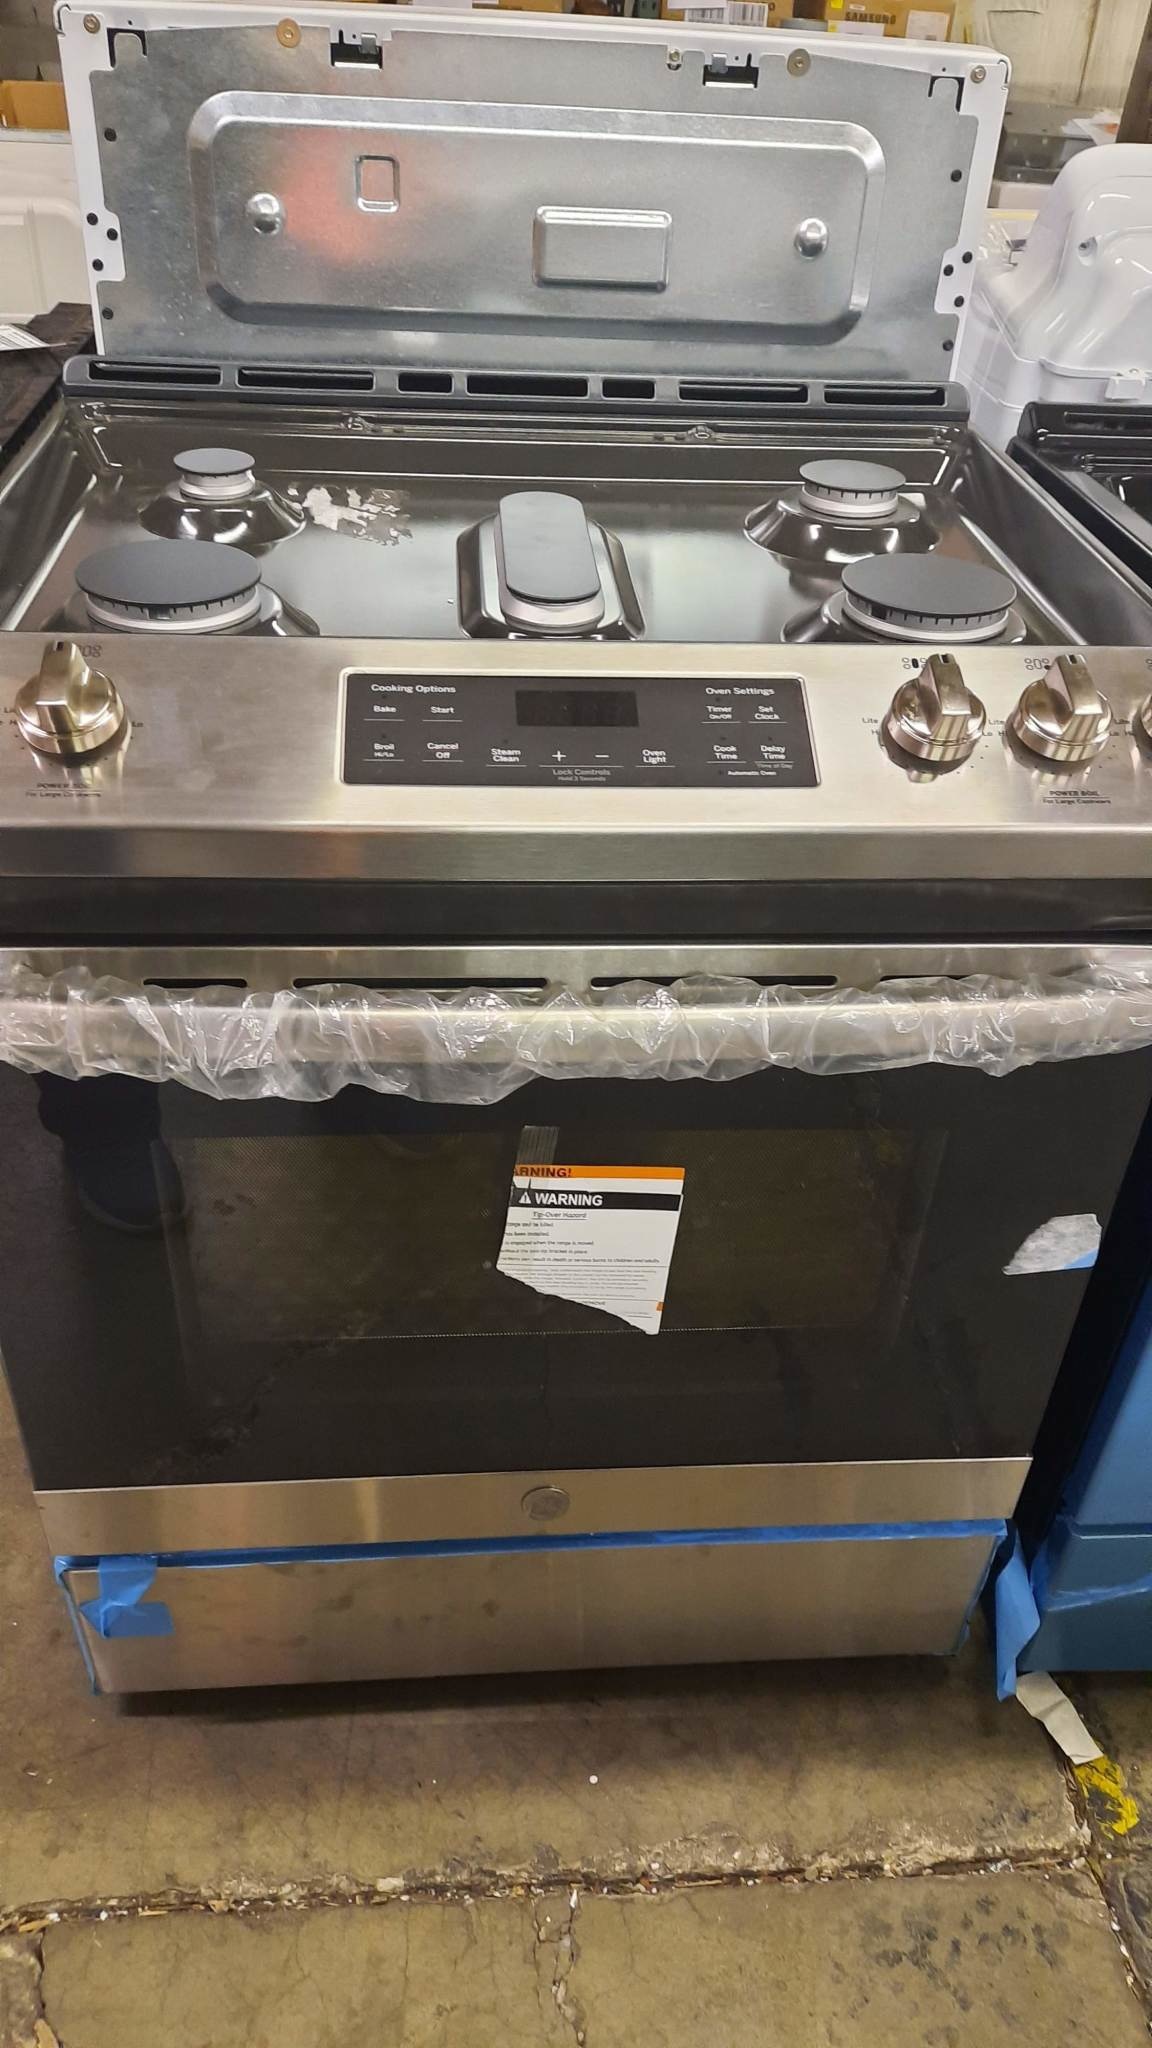 GE *GE   JGSS66SEL  5.3 cu. ft. Slide-In Gas Range with Steam-Cleaning Oven in Stainless Steel